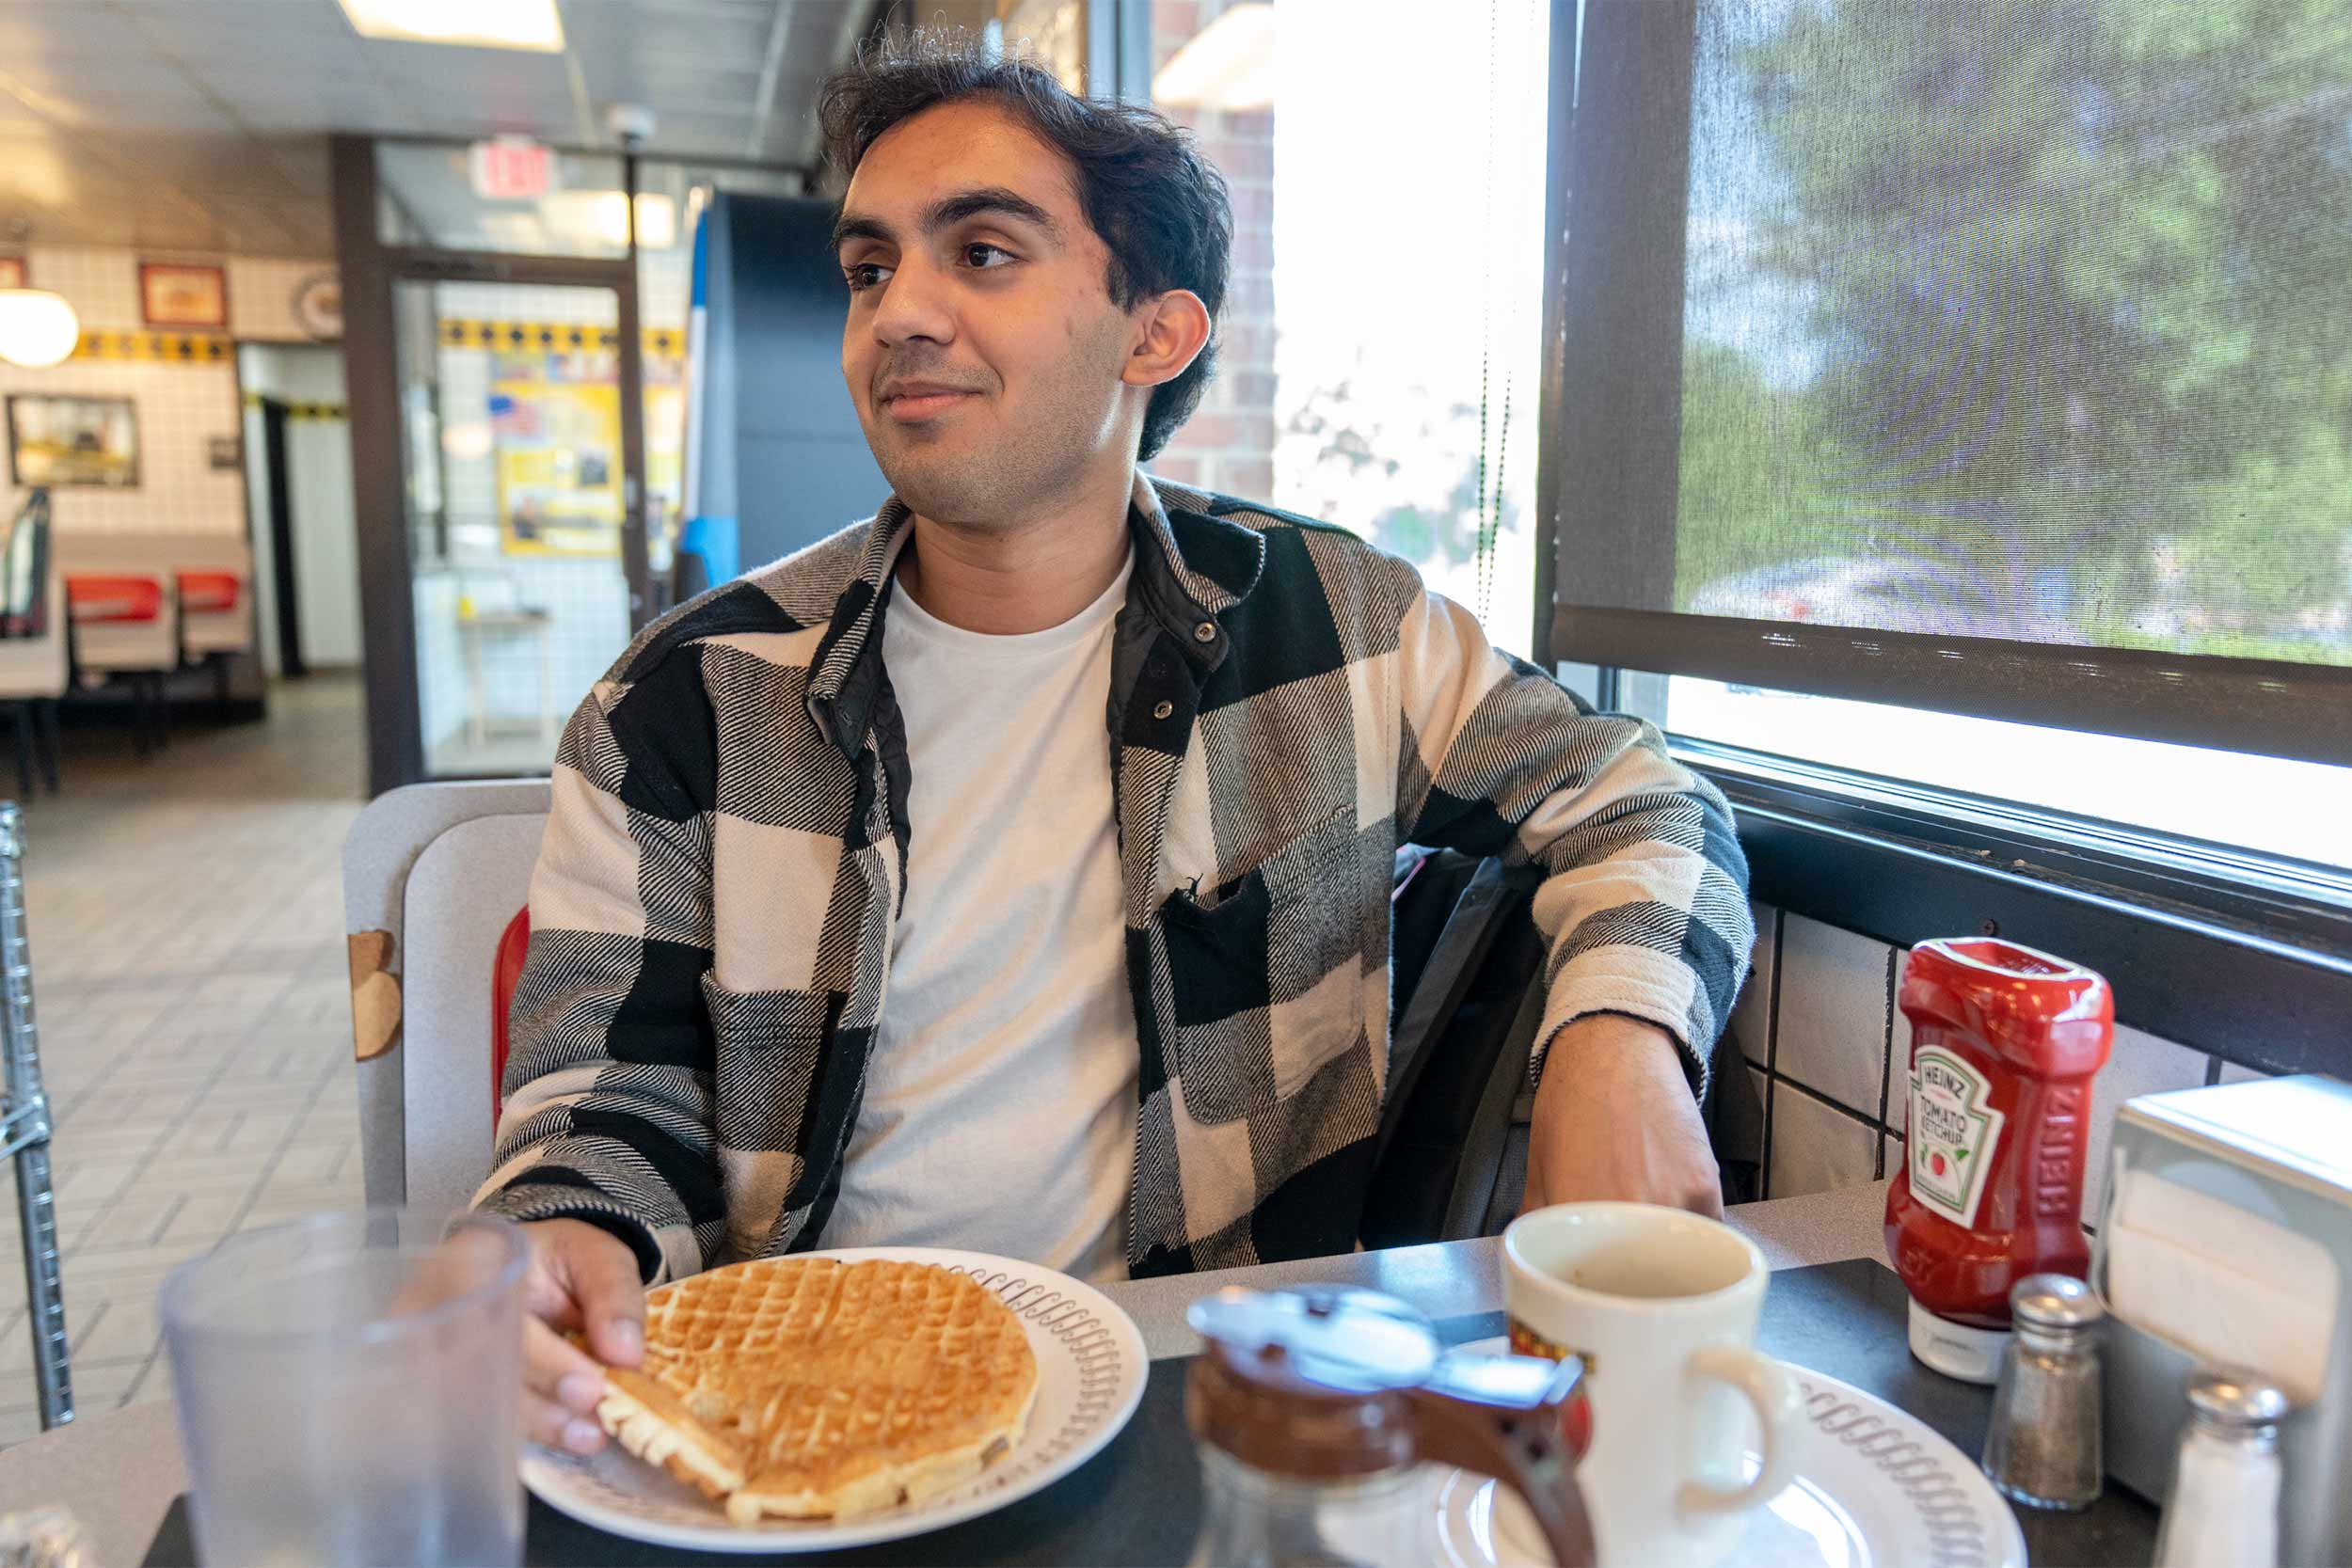 Portrait of Ibraheem Qureshi in Waffle House